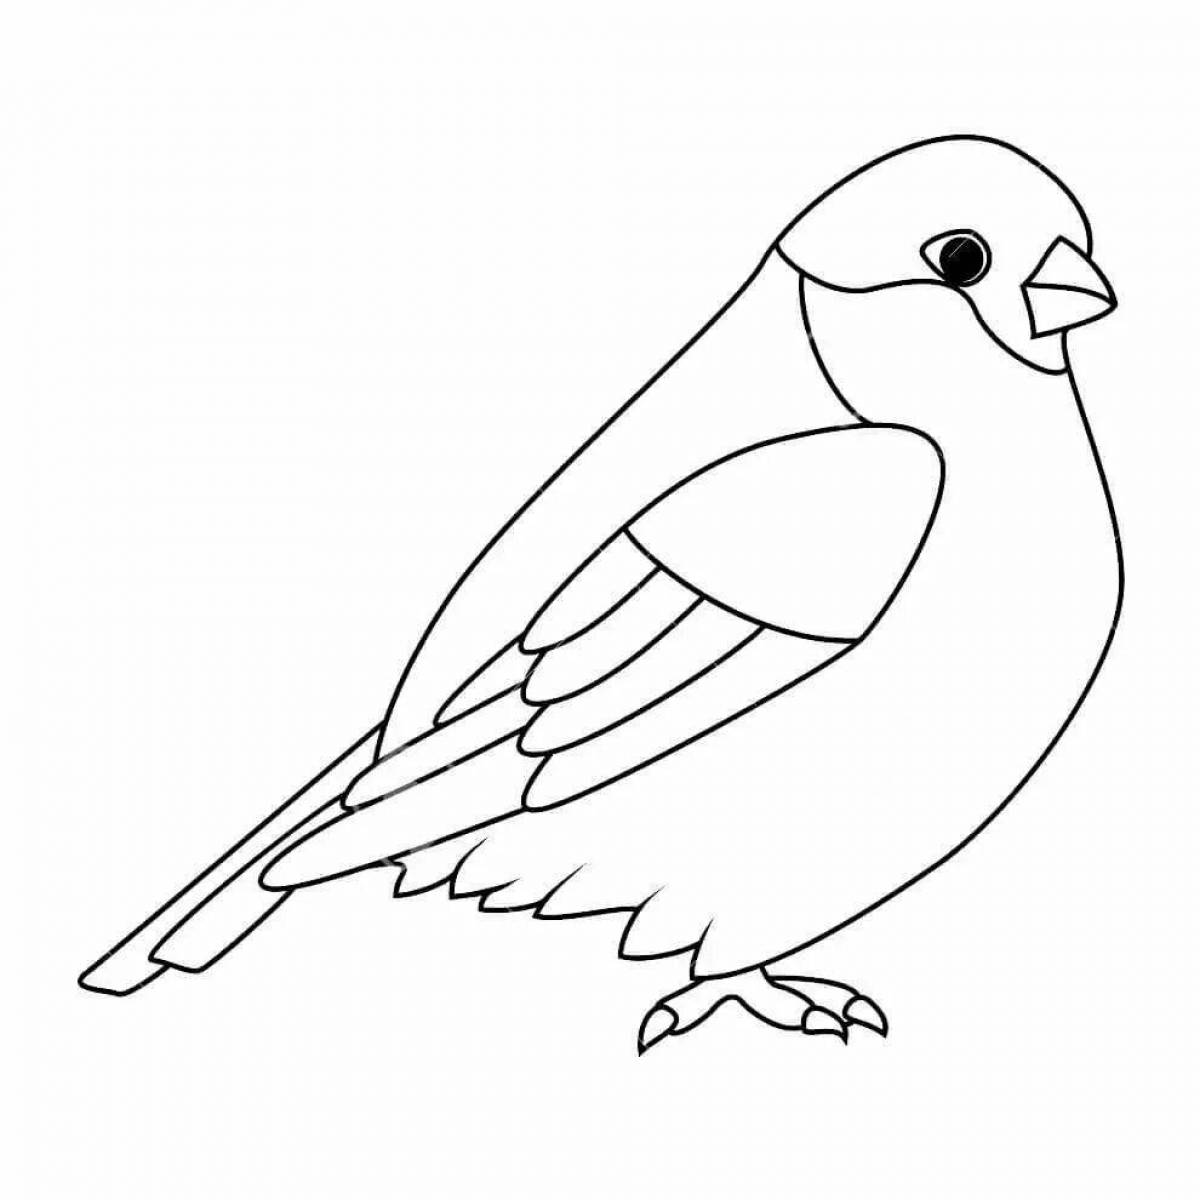 Colourful bullfinch coloring book for children 6-7 years old